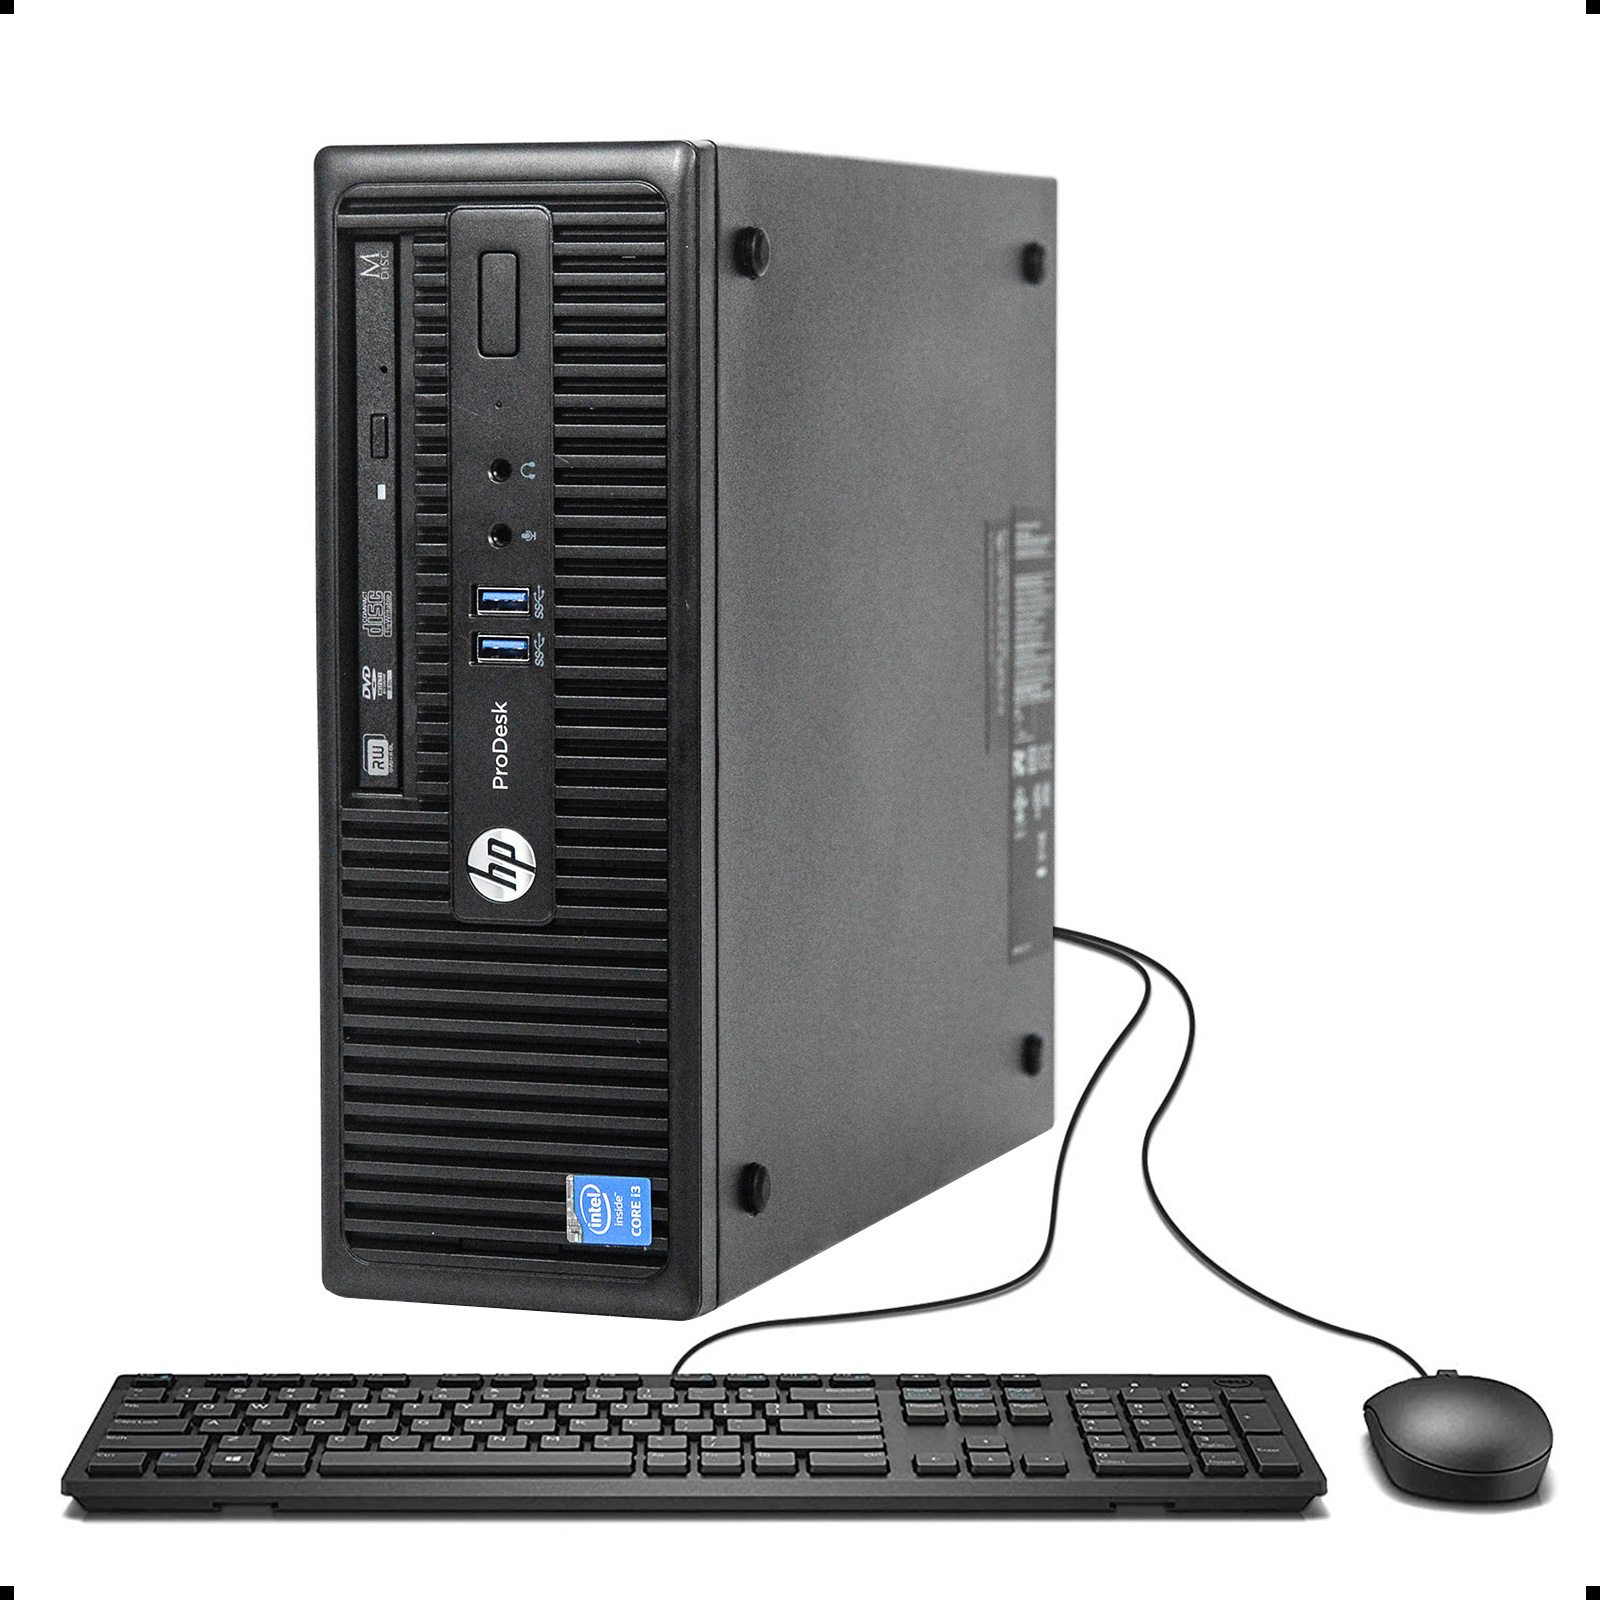 HP ProDesk 400 G2.5 SFF Business Desktop Computer PC, Intel Quad Core i5-4590S up to 3.7GHz, 16G DDR3, 512G SSD, DVDRW, WiFi, BT, 4K Support, DP, VGA, Window 10 Pro 64 En/Sp/Fr Used Grade A - image 1 of 5